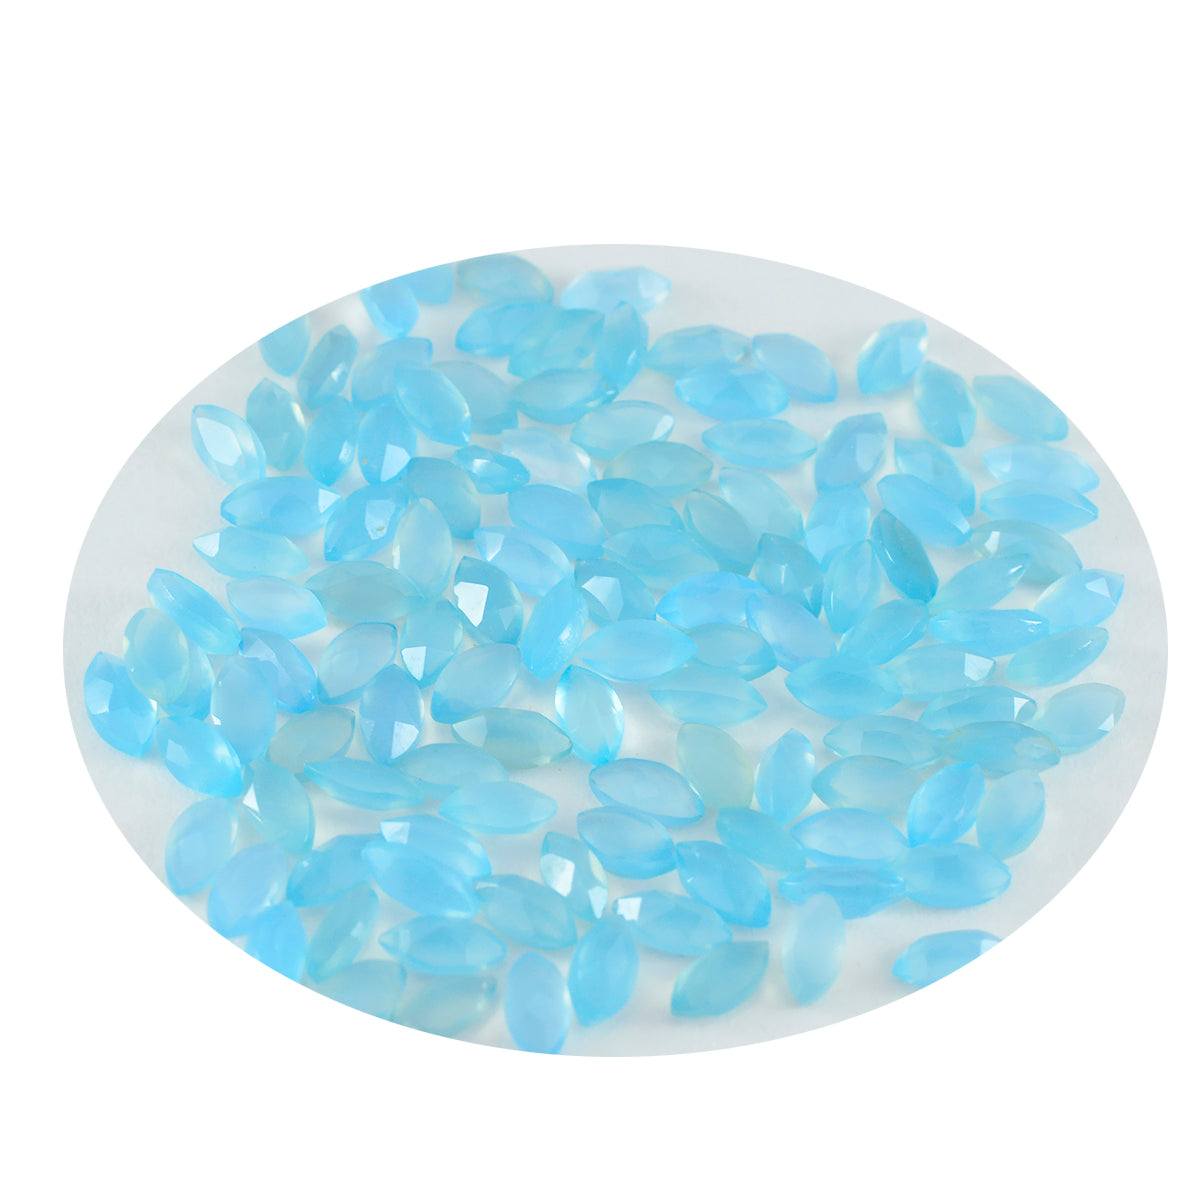 Riyogems 1PC Real Blue Chalcedony Faceted 2x4 mm Marquise Shape cute Quality Stone